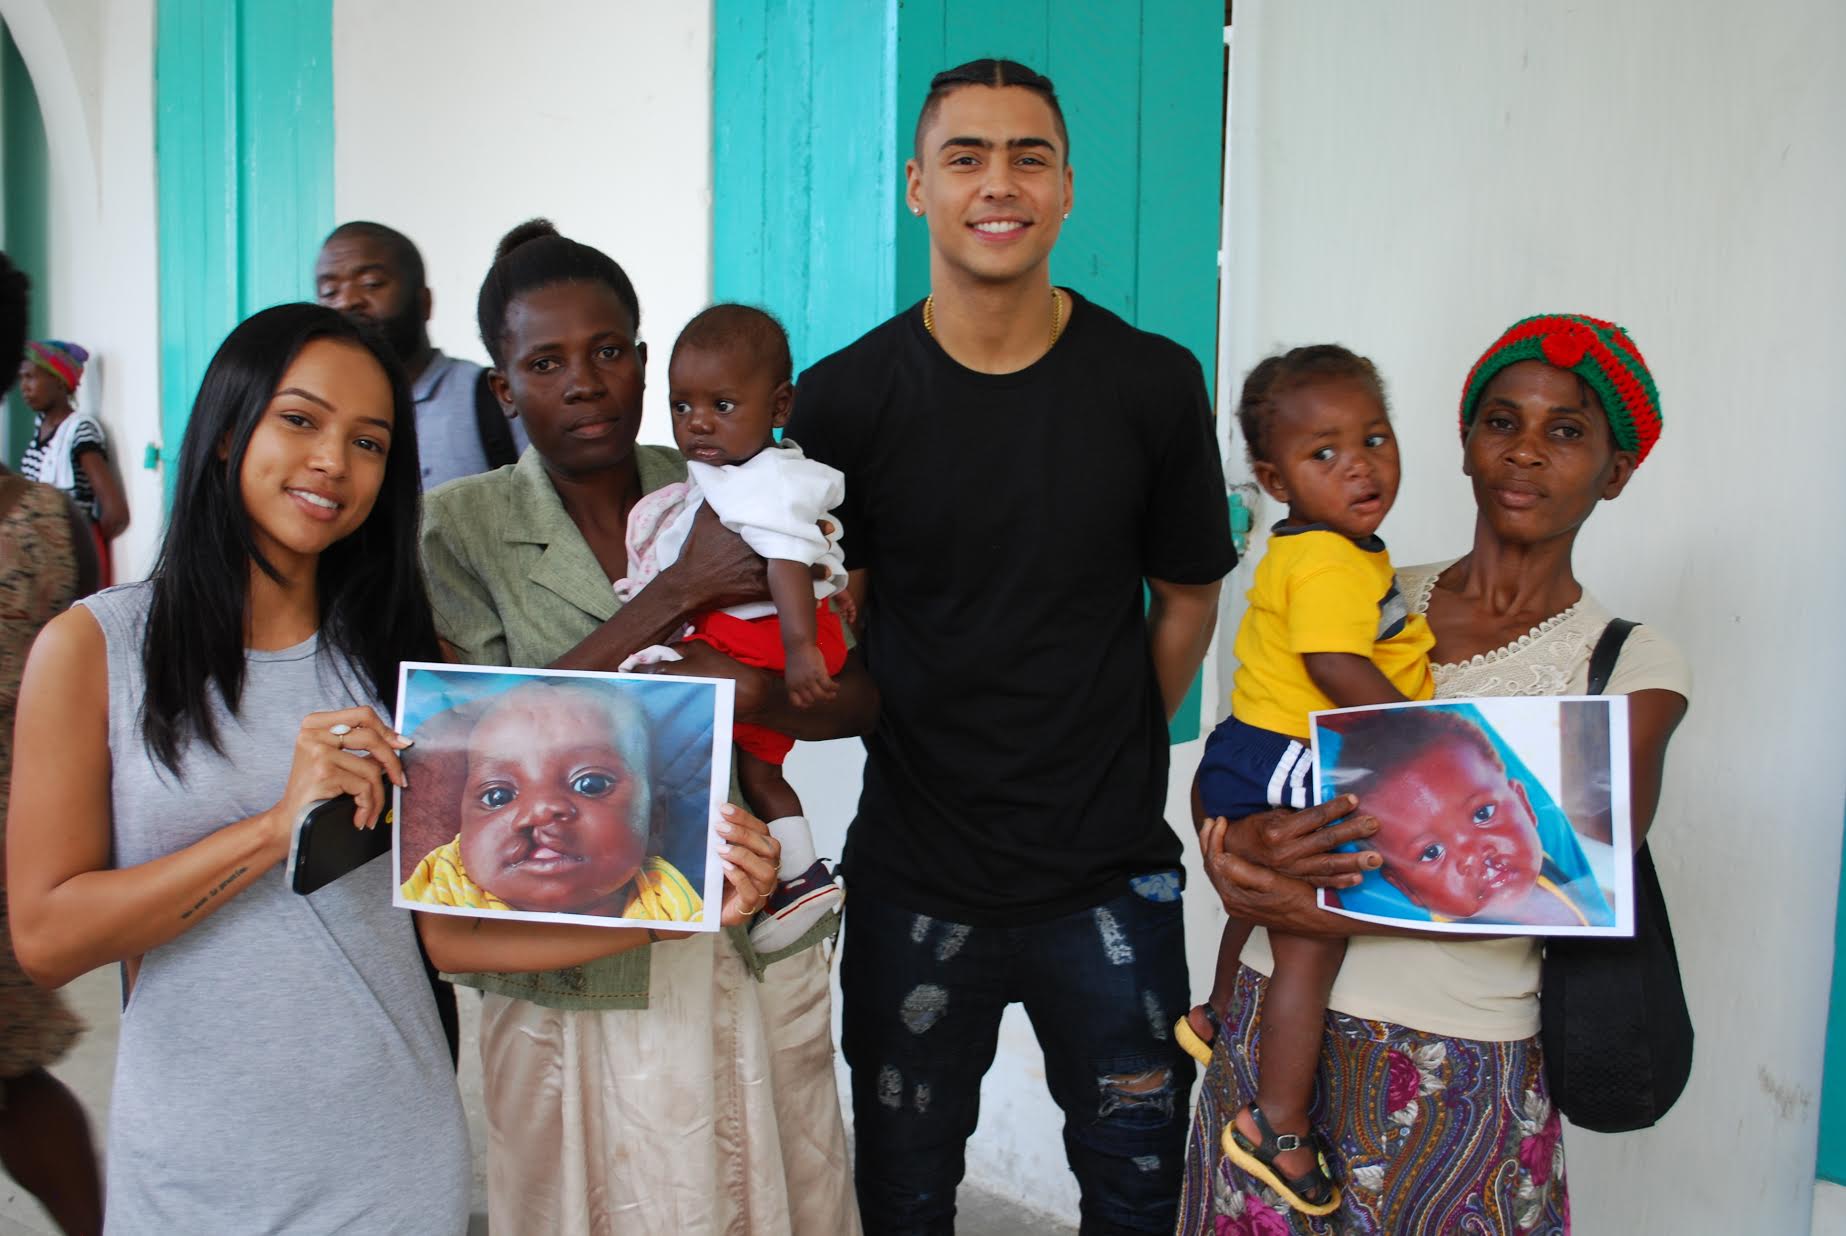 Karrueche Tran and Quincy Brown visit Smile Train patients and their families at Justinian University Hospital in Cap-Haitien, Haiti.